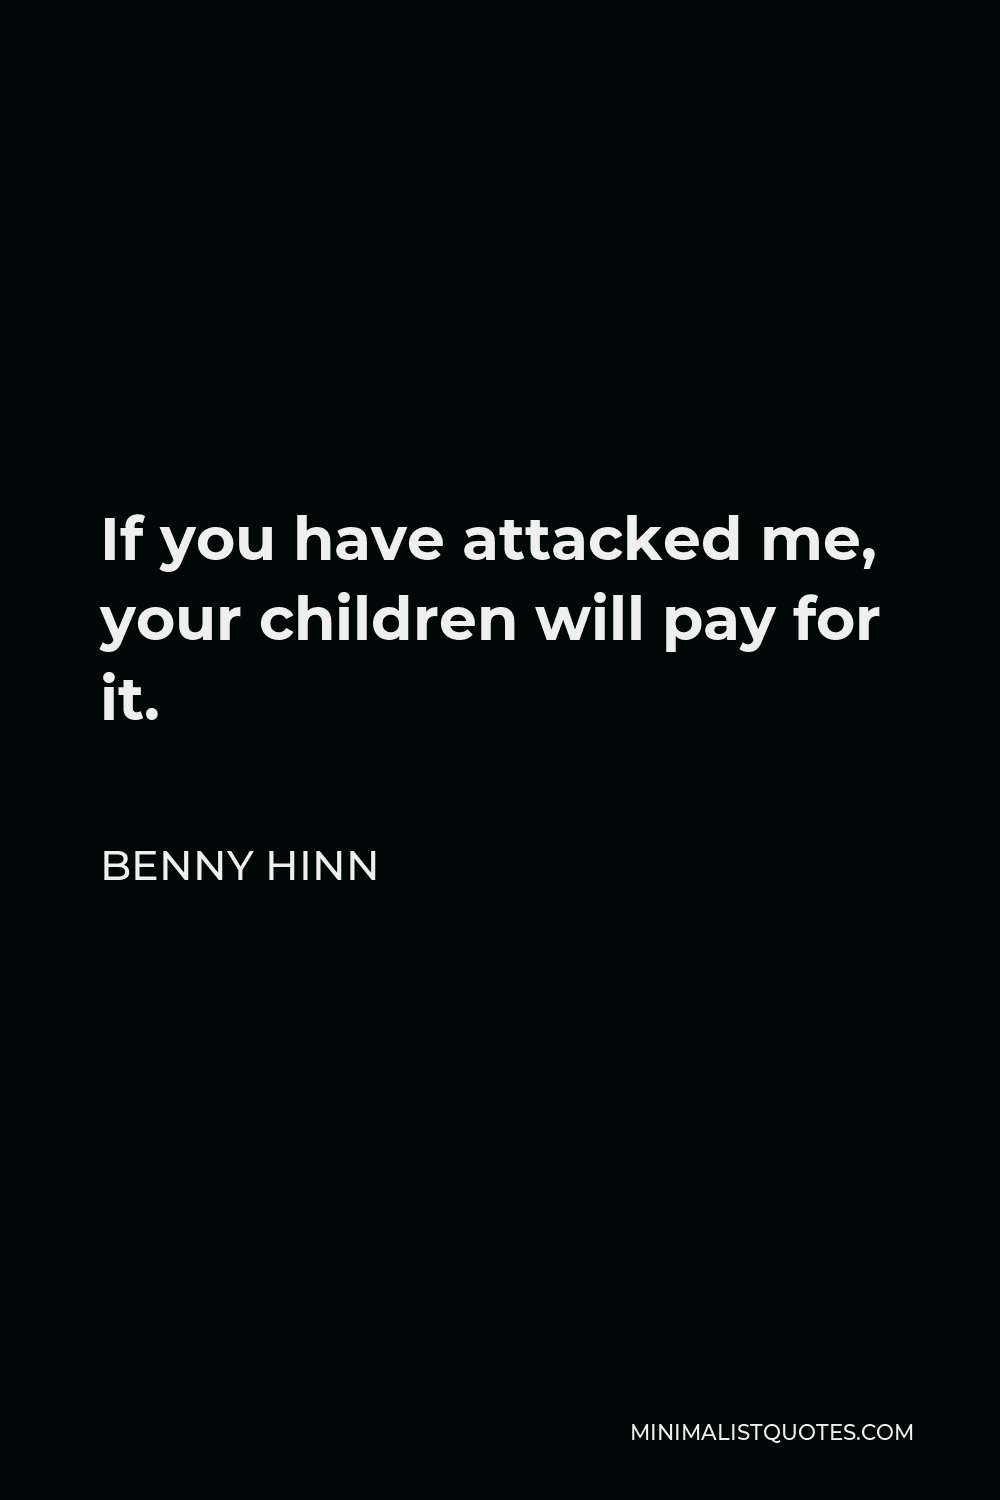 Benny Hinn Quote - If you have attacked me, your children will pay for it.